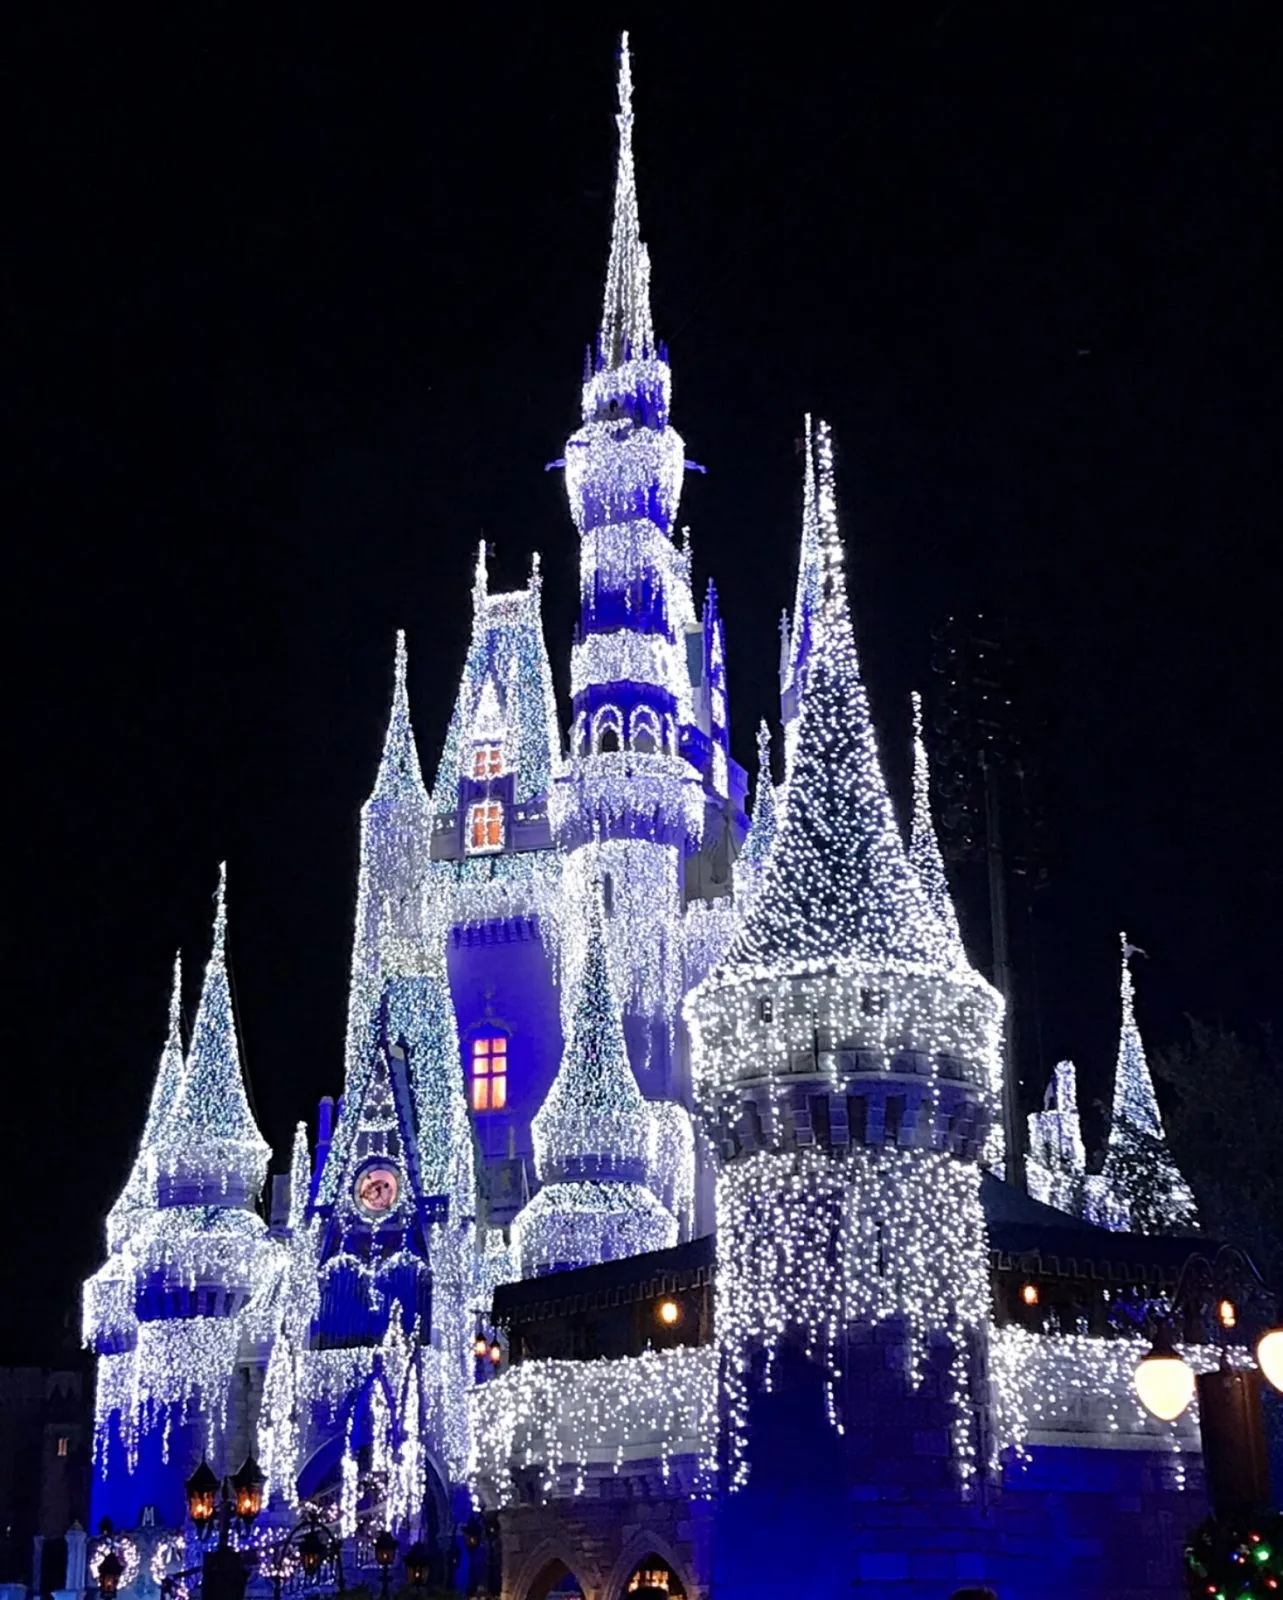 Cinderella's castle with holiday lights - disney world christmas decorations